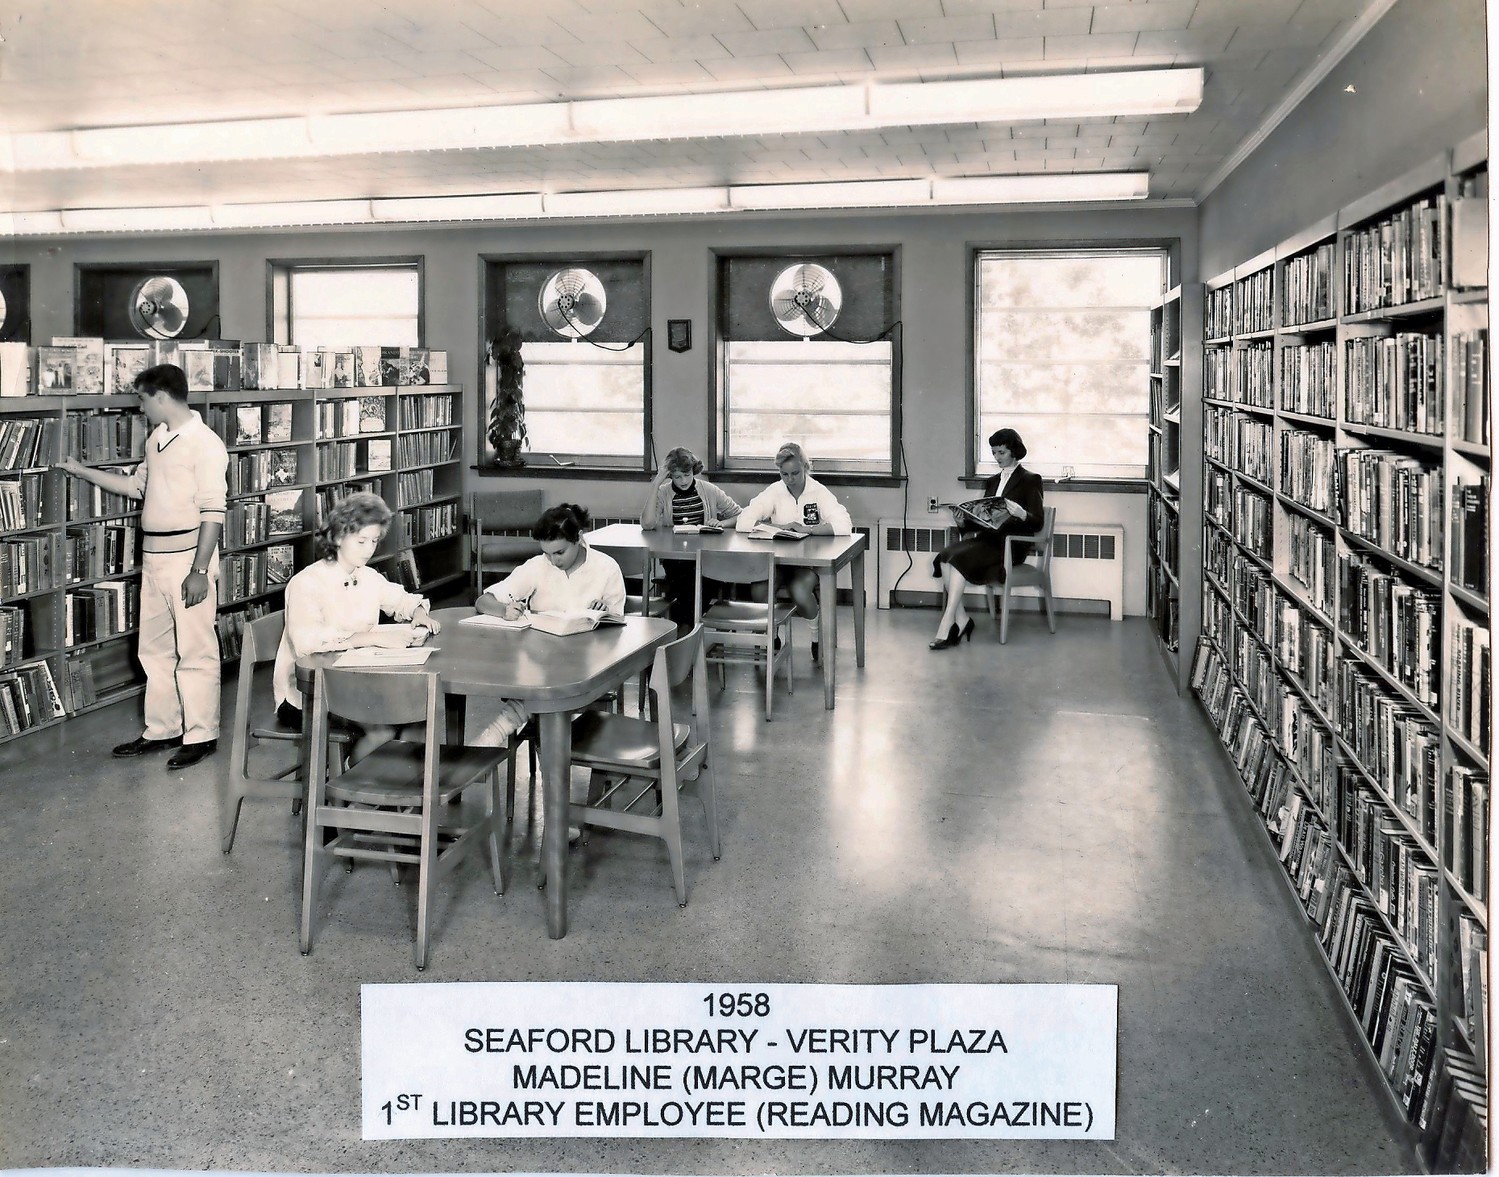 Madeline Murray, far right, the first Seaford Library clerk, read a magazine in the original building, at Verity Plaza, in 1958.